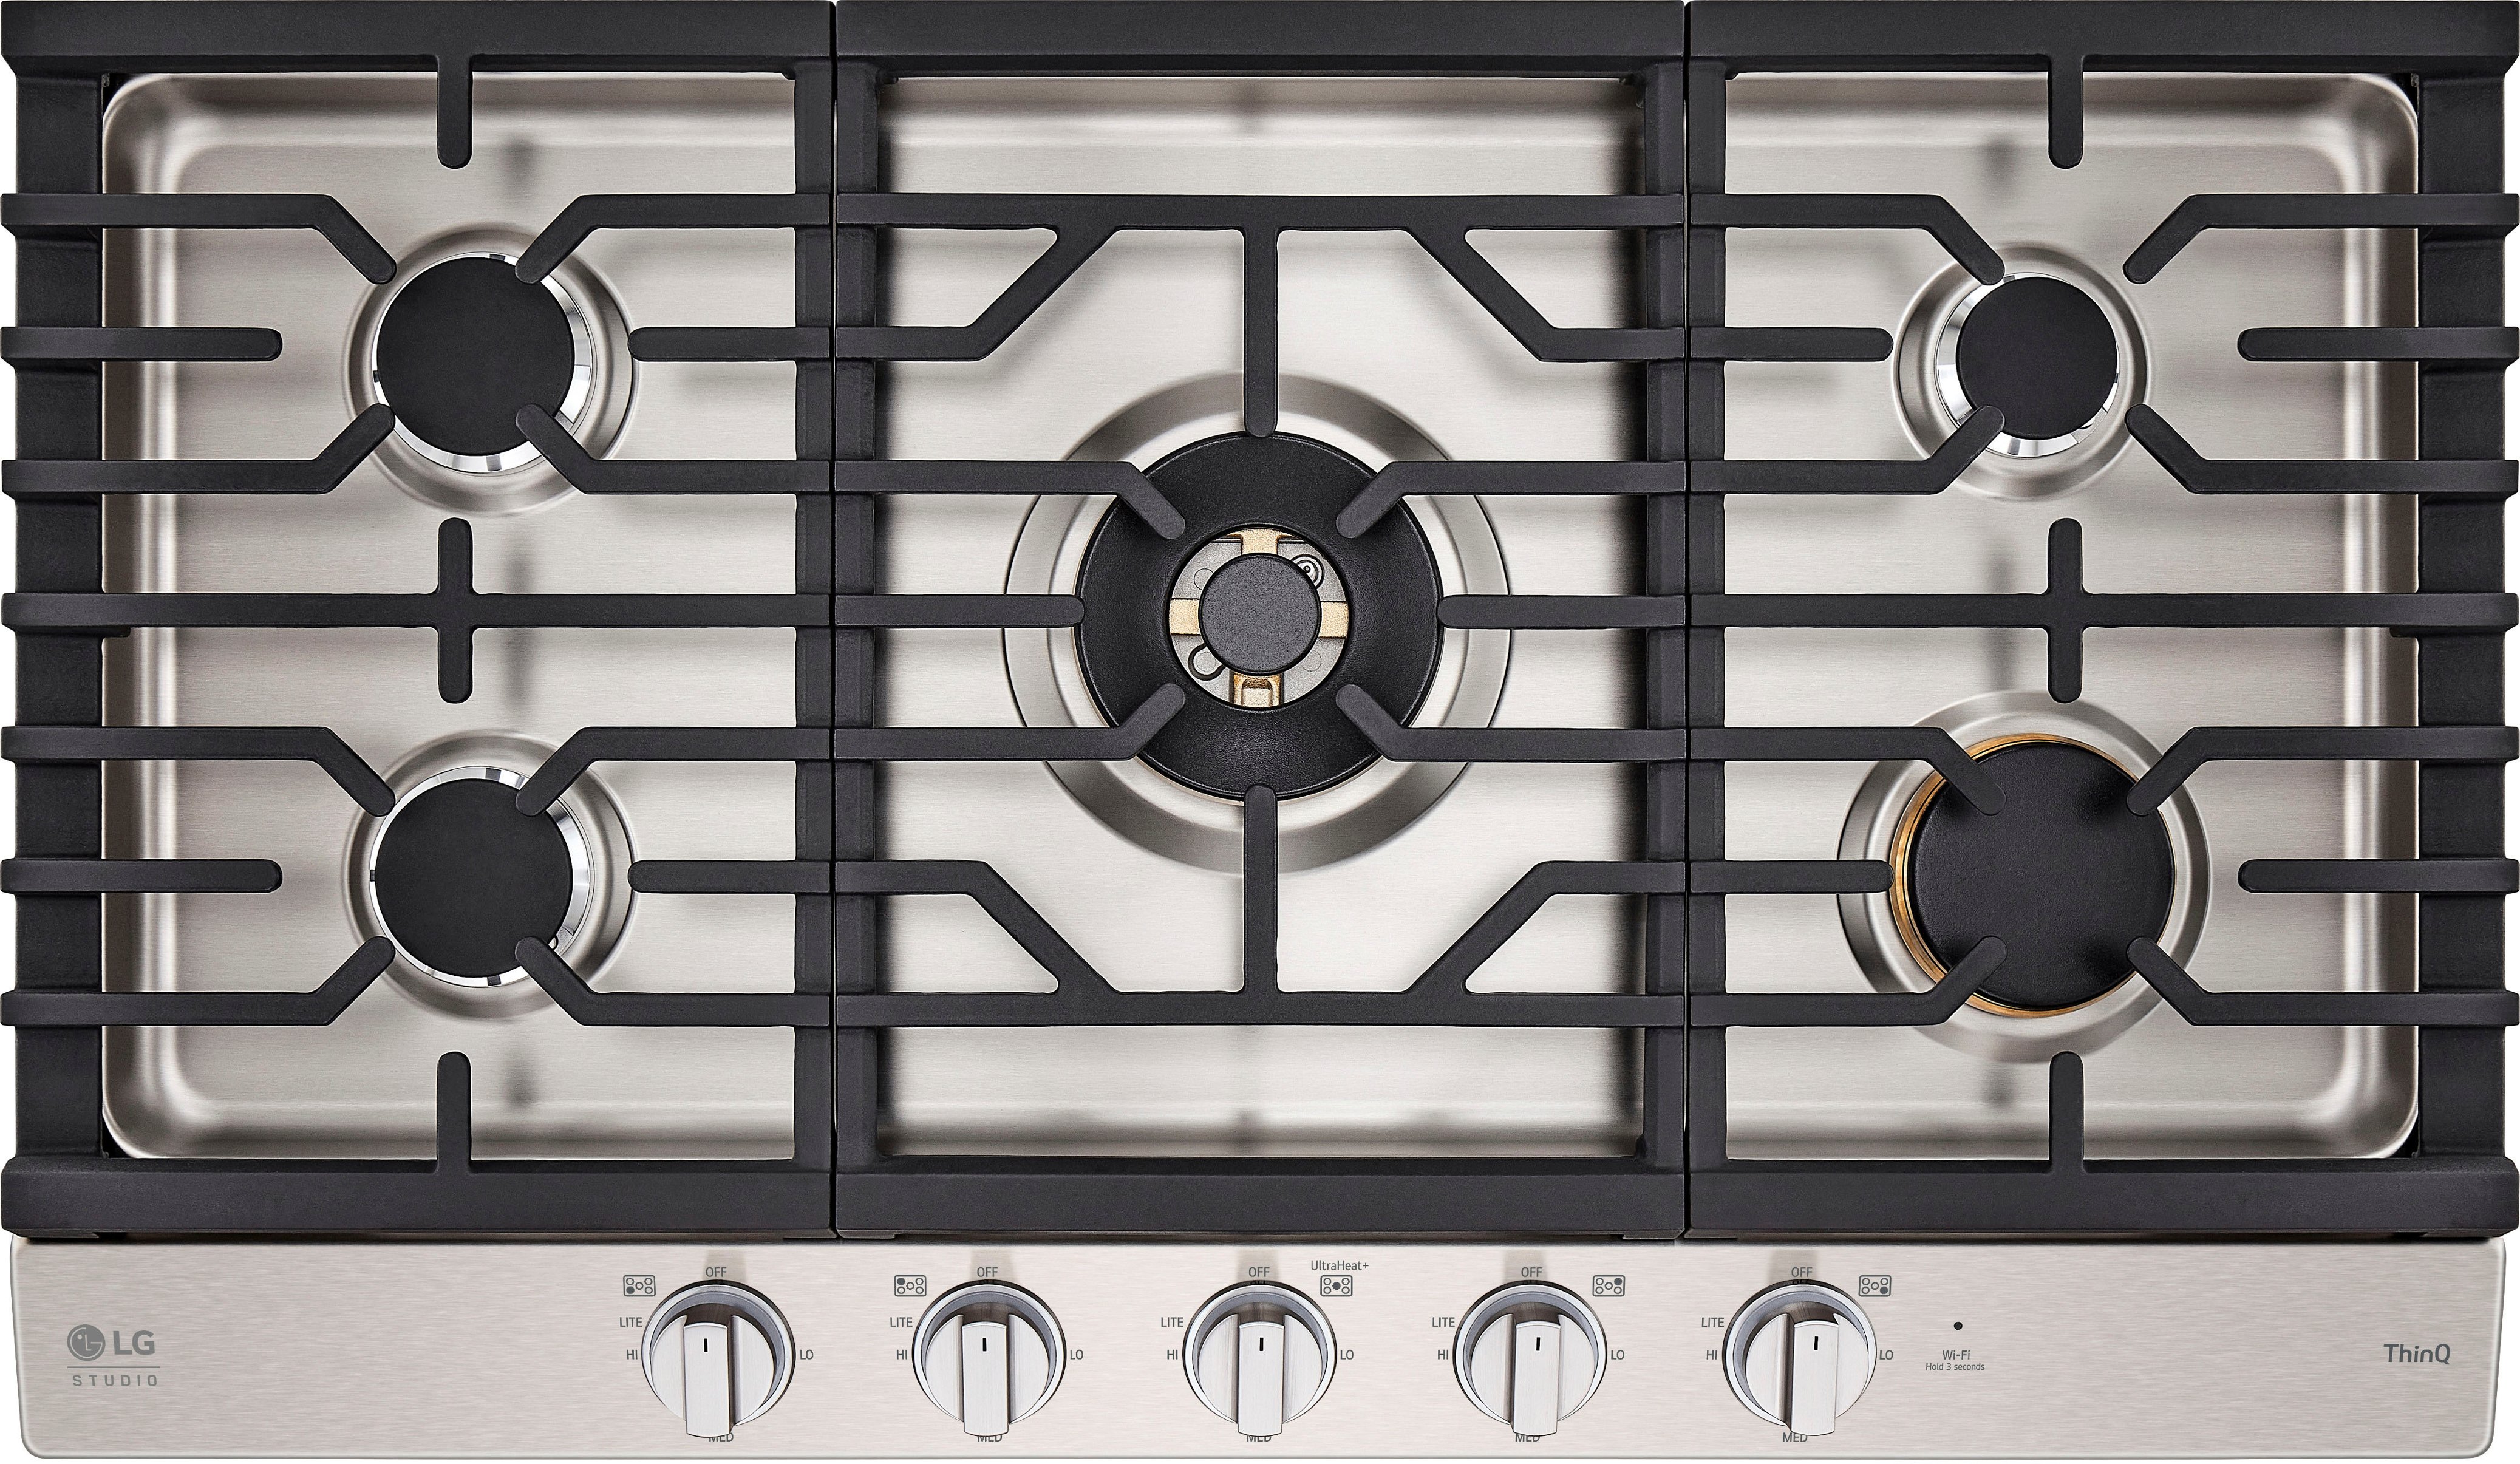 Gas Cooktop 36 inch Bulit-in Gas Stove Top with 5 Burner